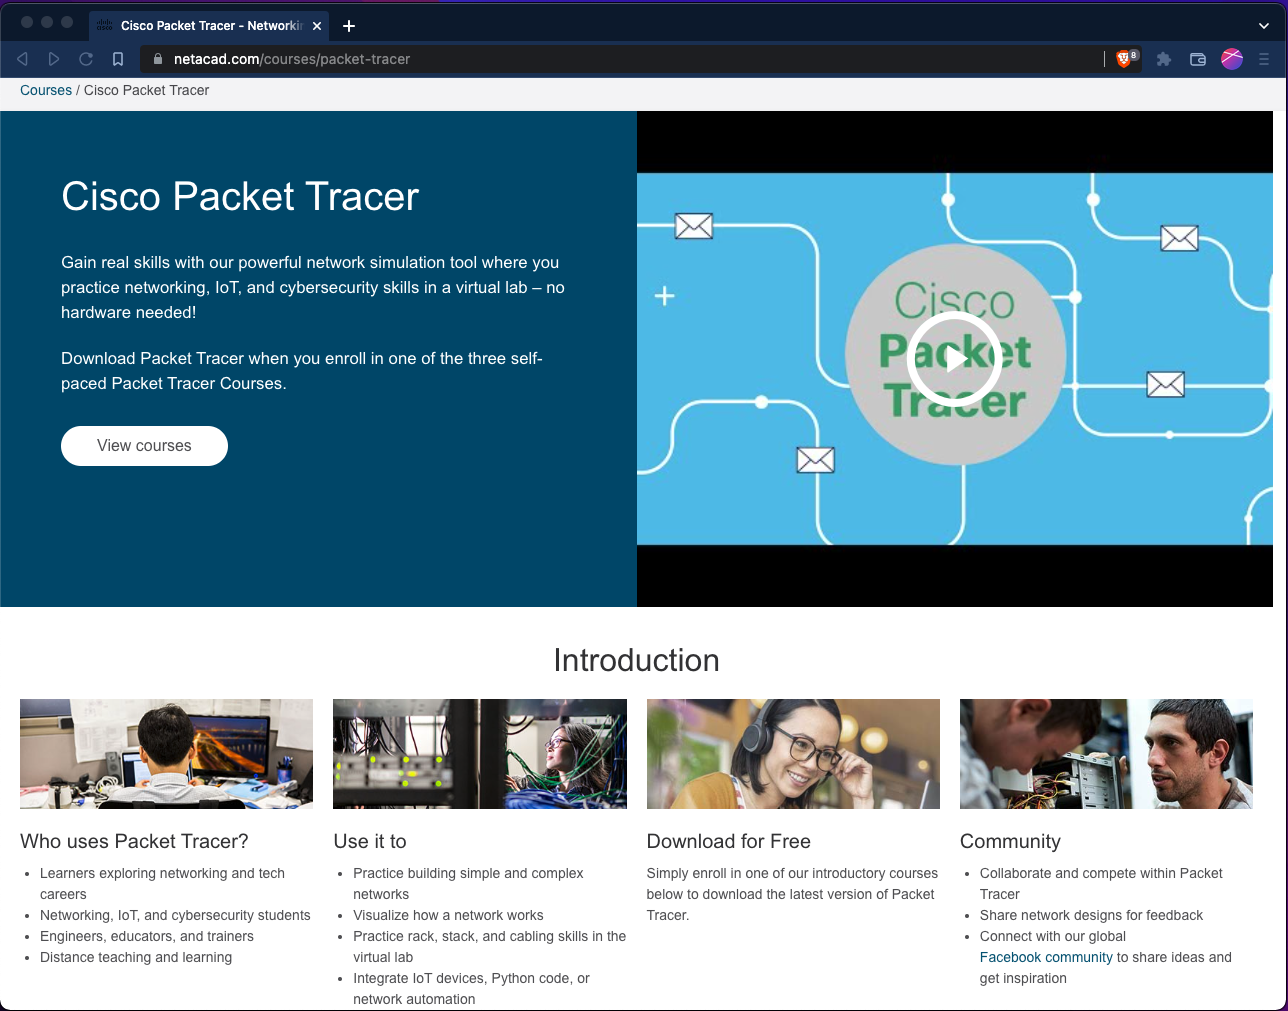 Here’s an overview of the Cisco Packet Tracer tool